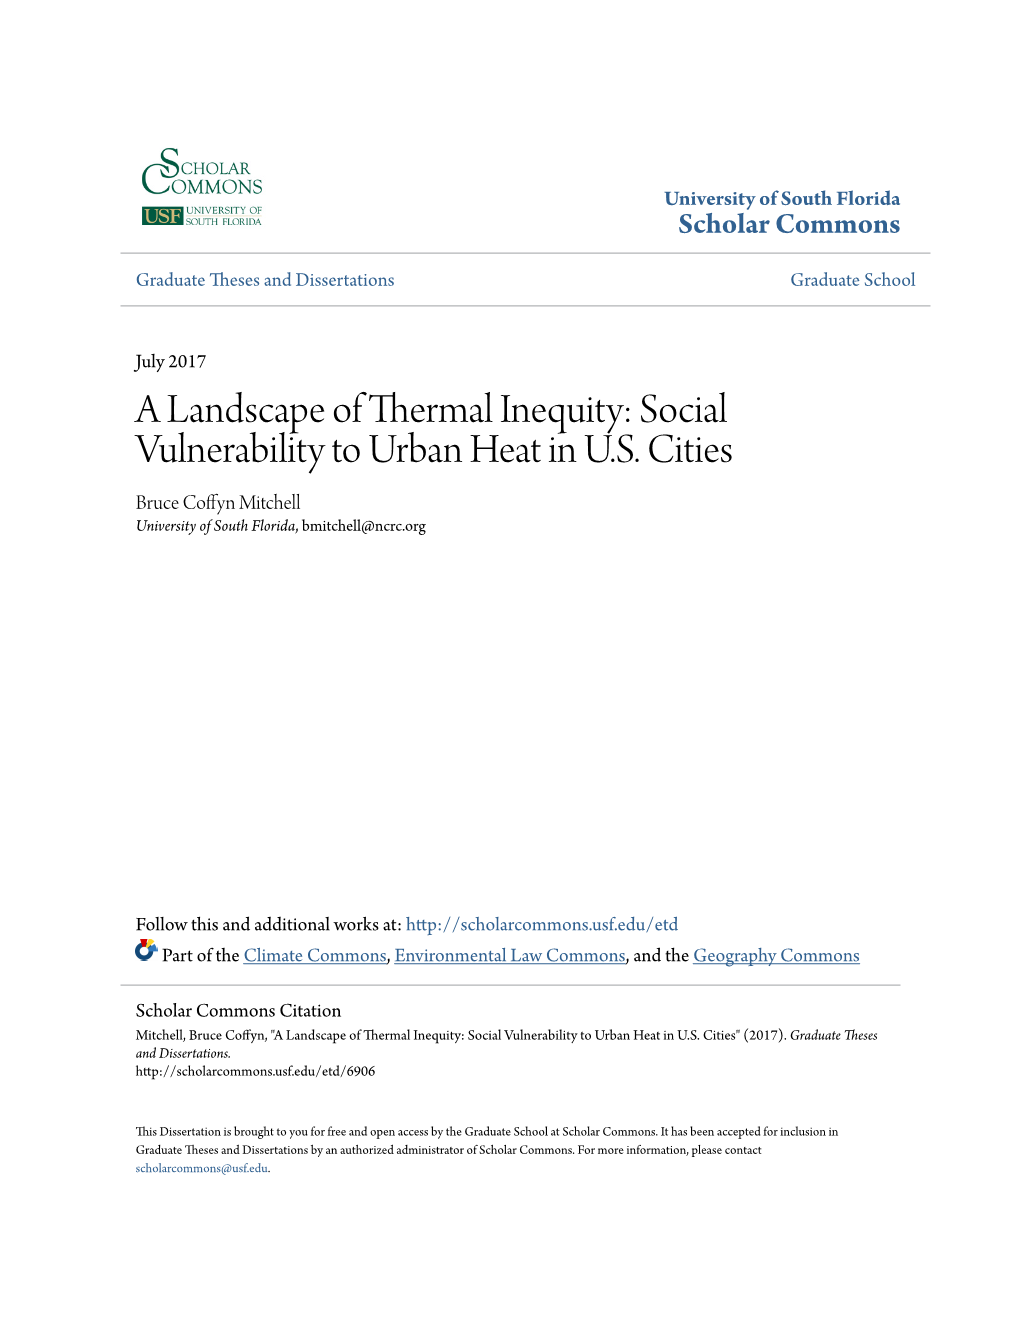 A Landscape of Thermal Inequity: Social Vulnerability to Urban Heat in U.S